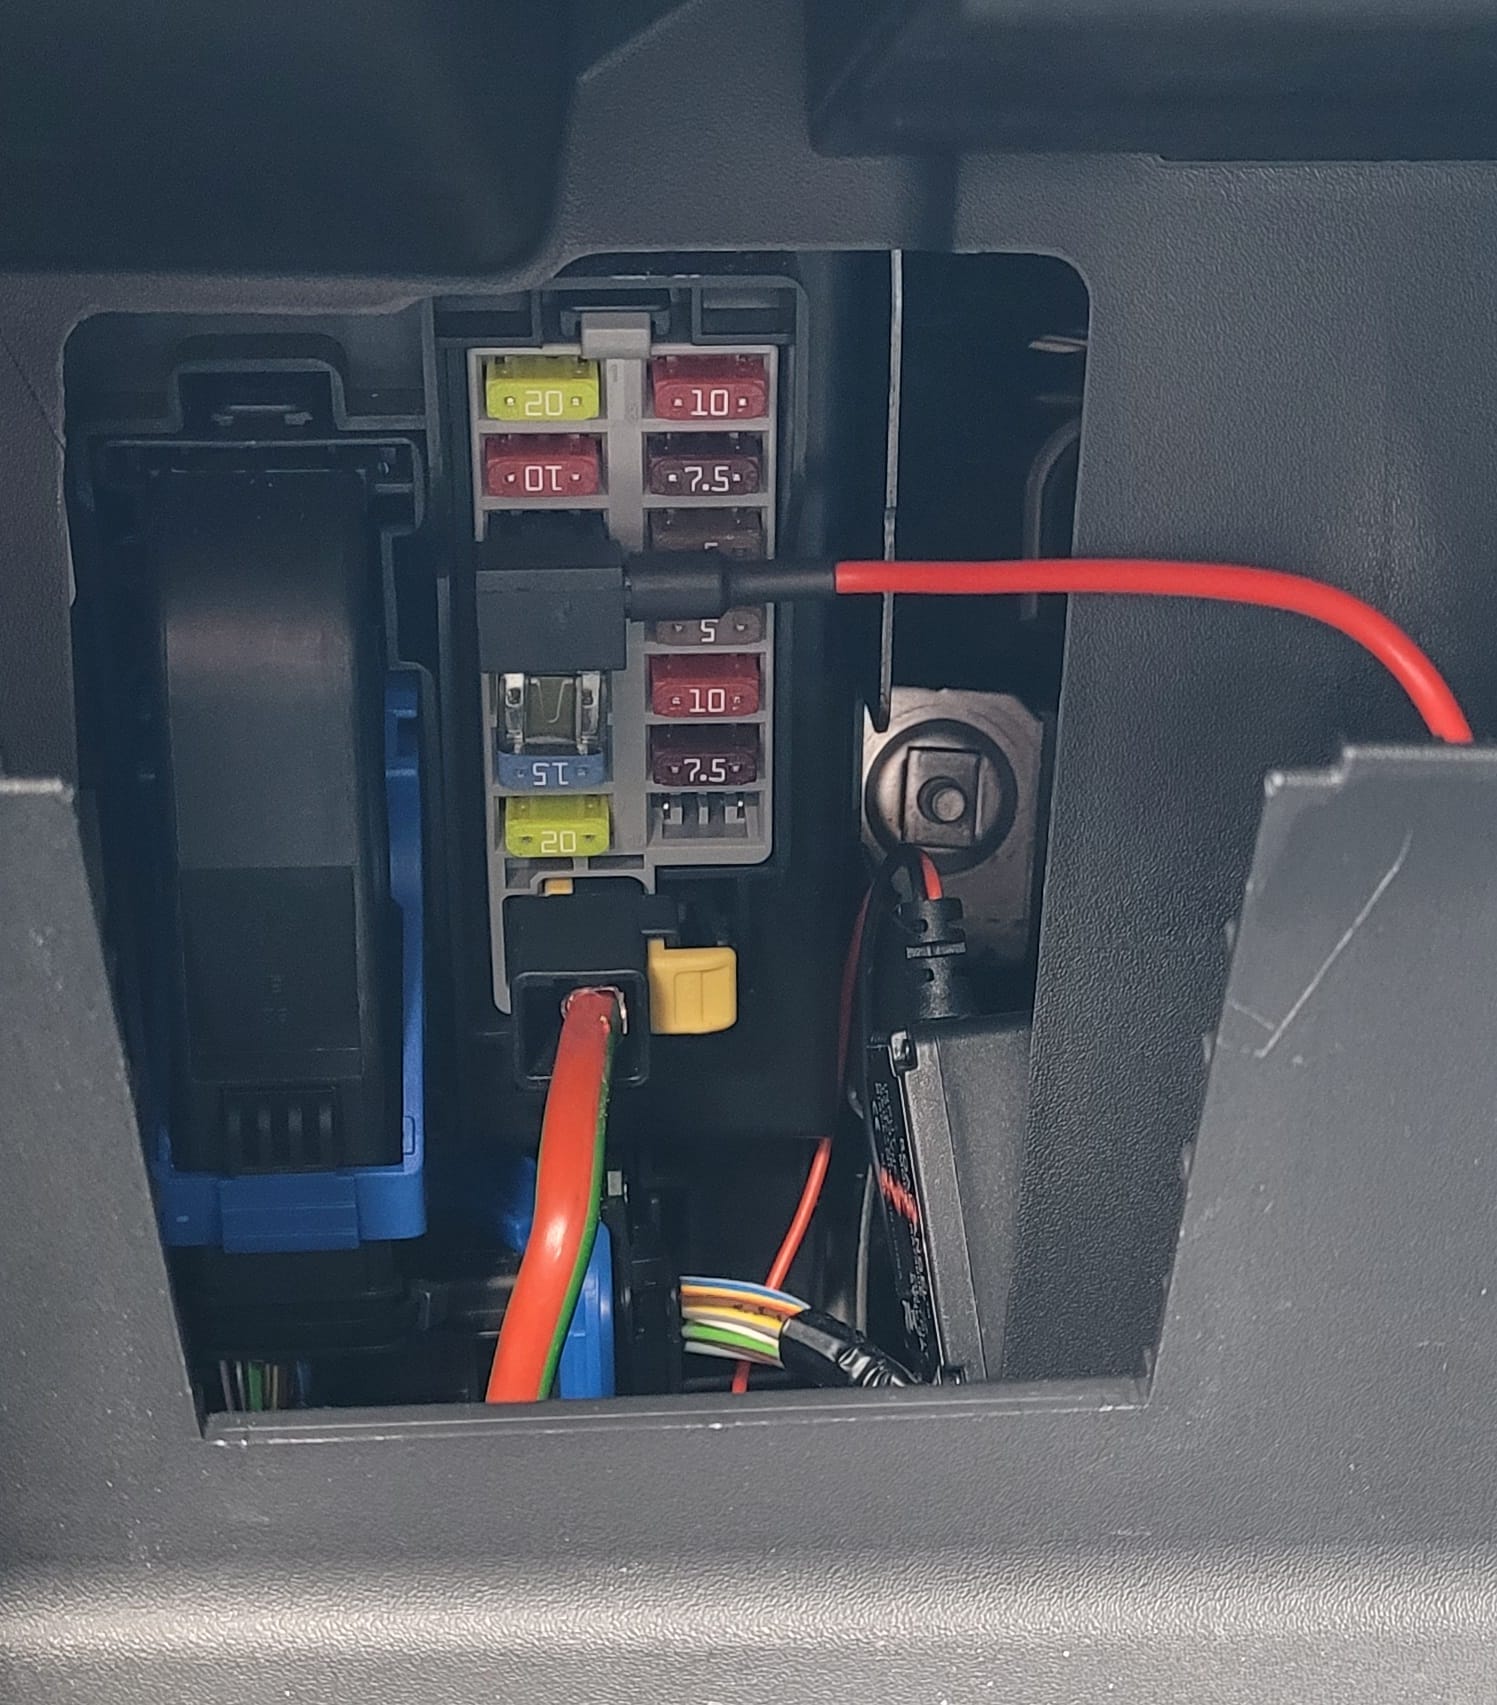 Image shows the positive power connection from the fuse box.